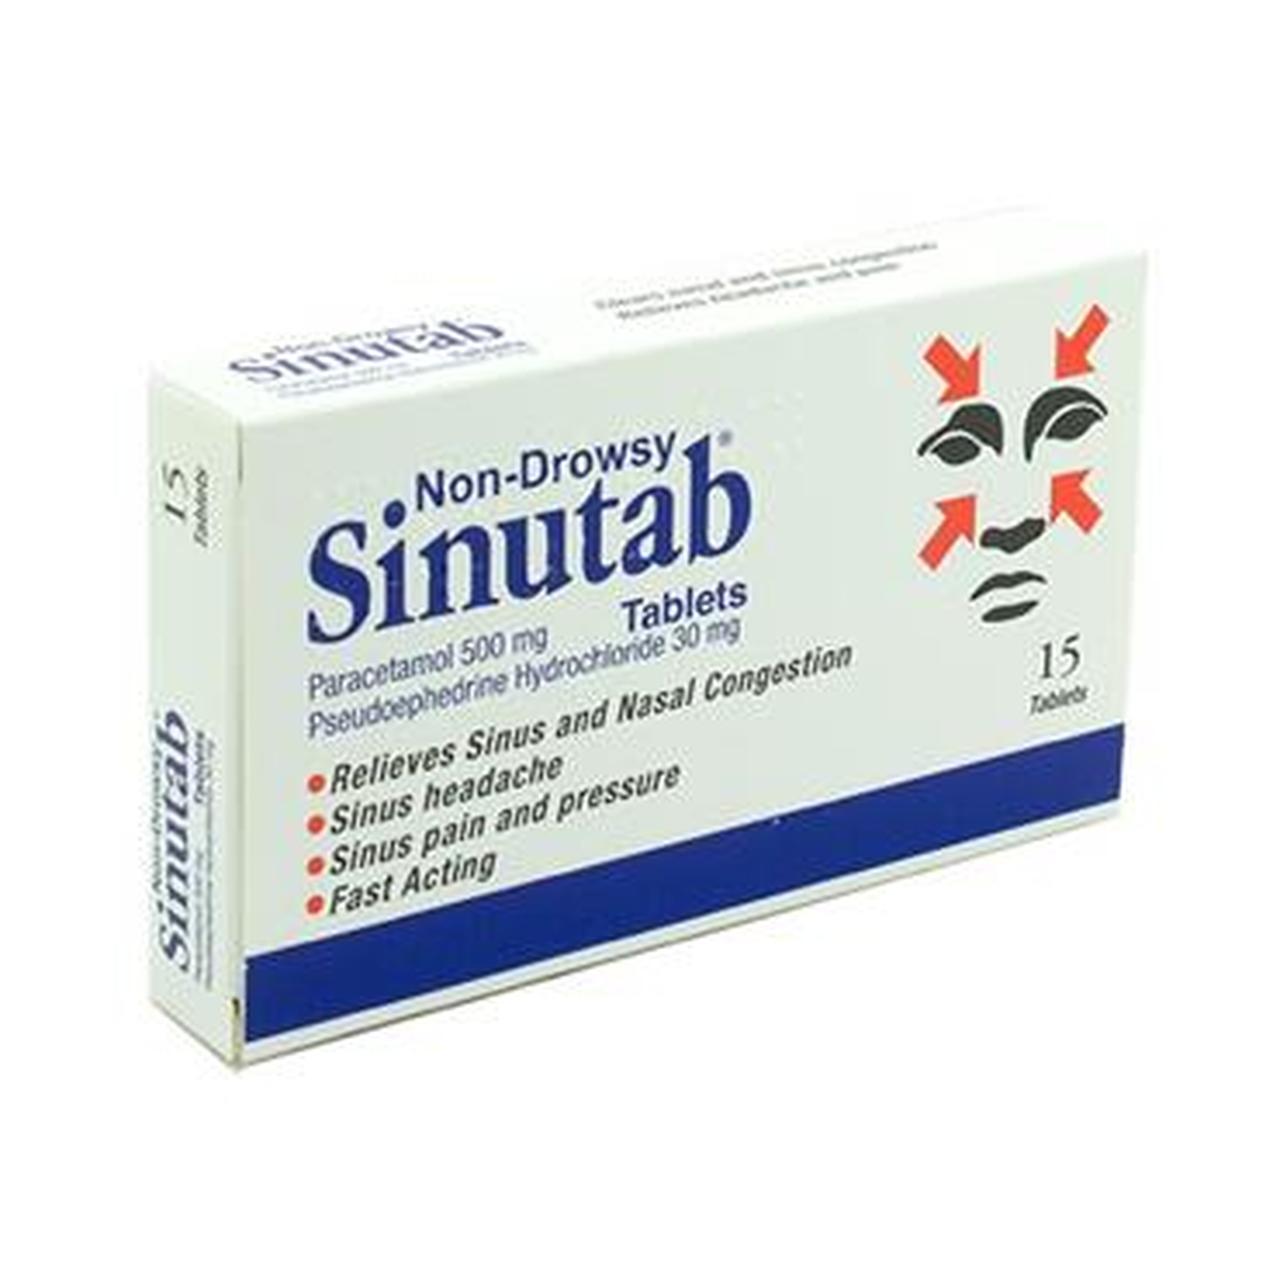 Sinutabs Non Drowsey Tablets 15 Pack, Sinus congestion, Leahys pharmacy